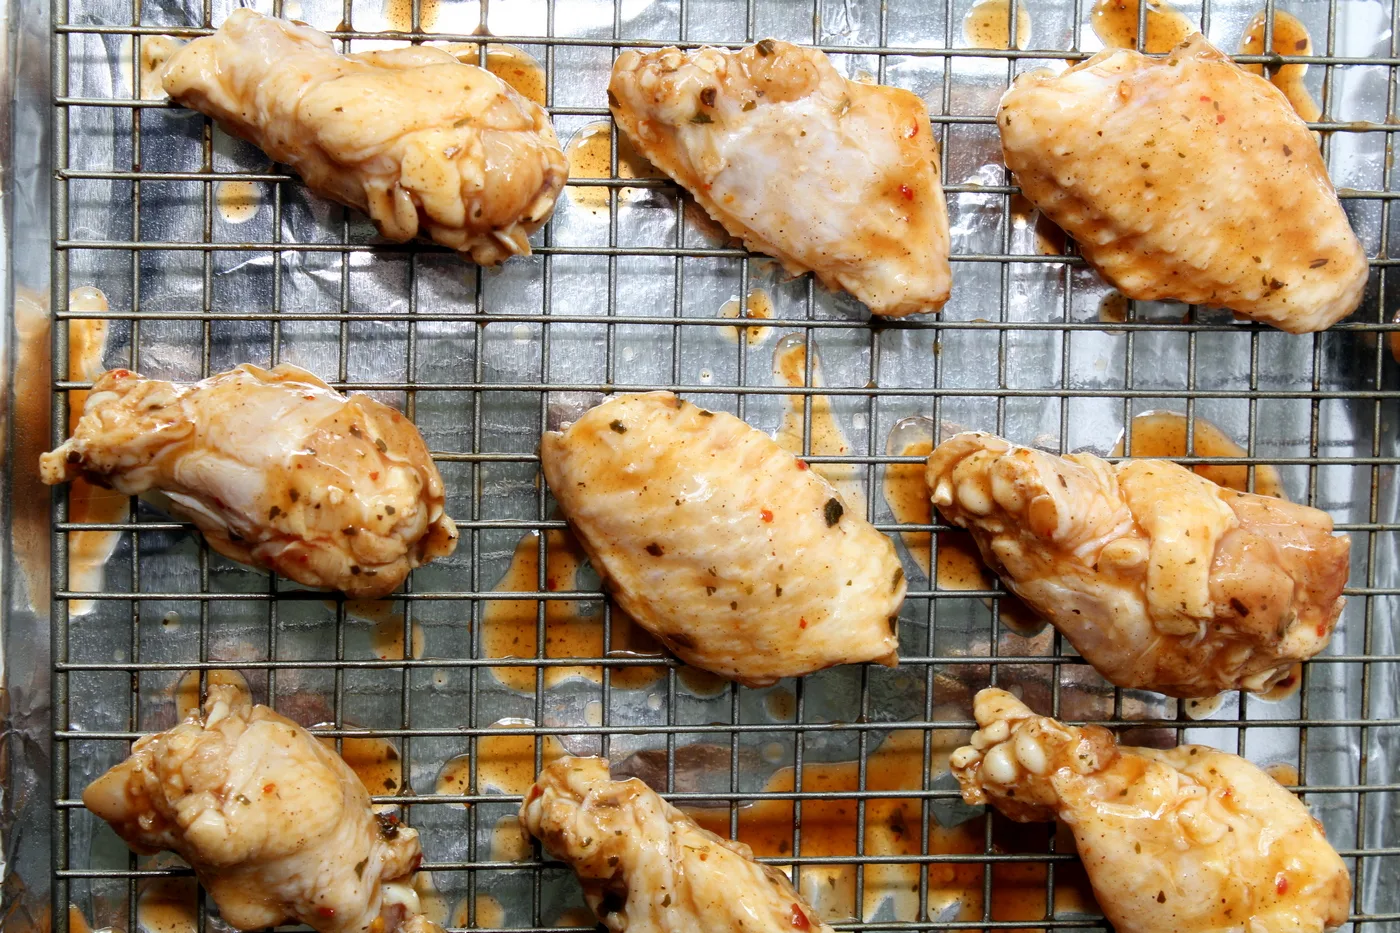 Chicken wings on baking sheet with foil